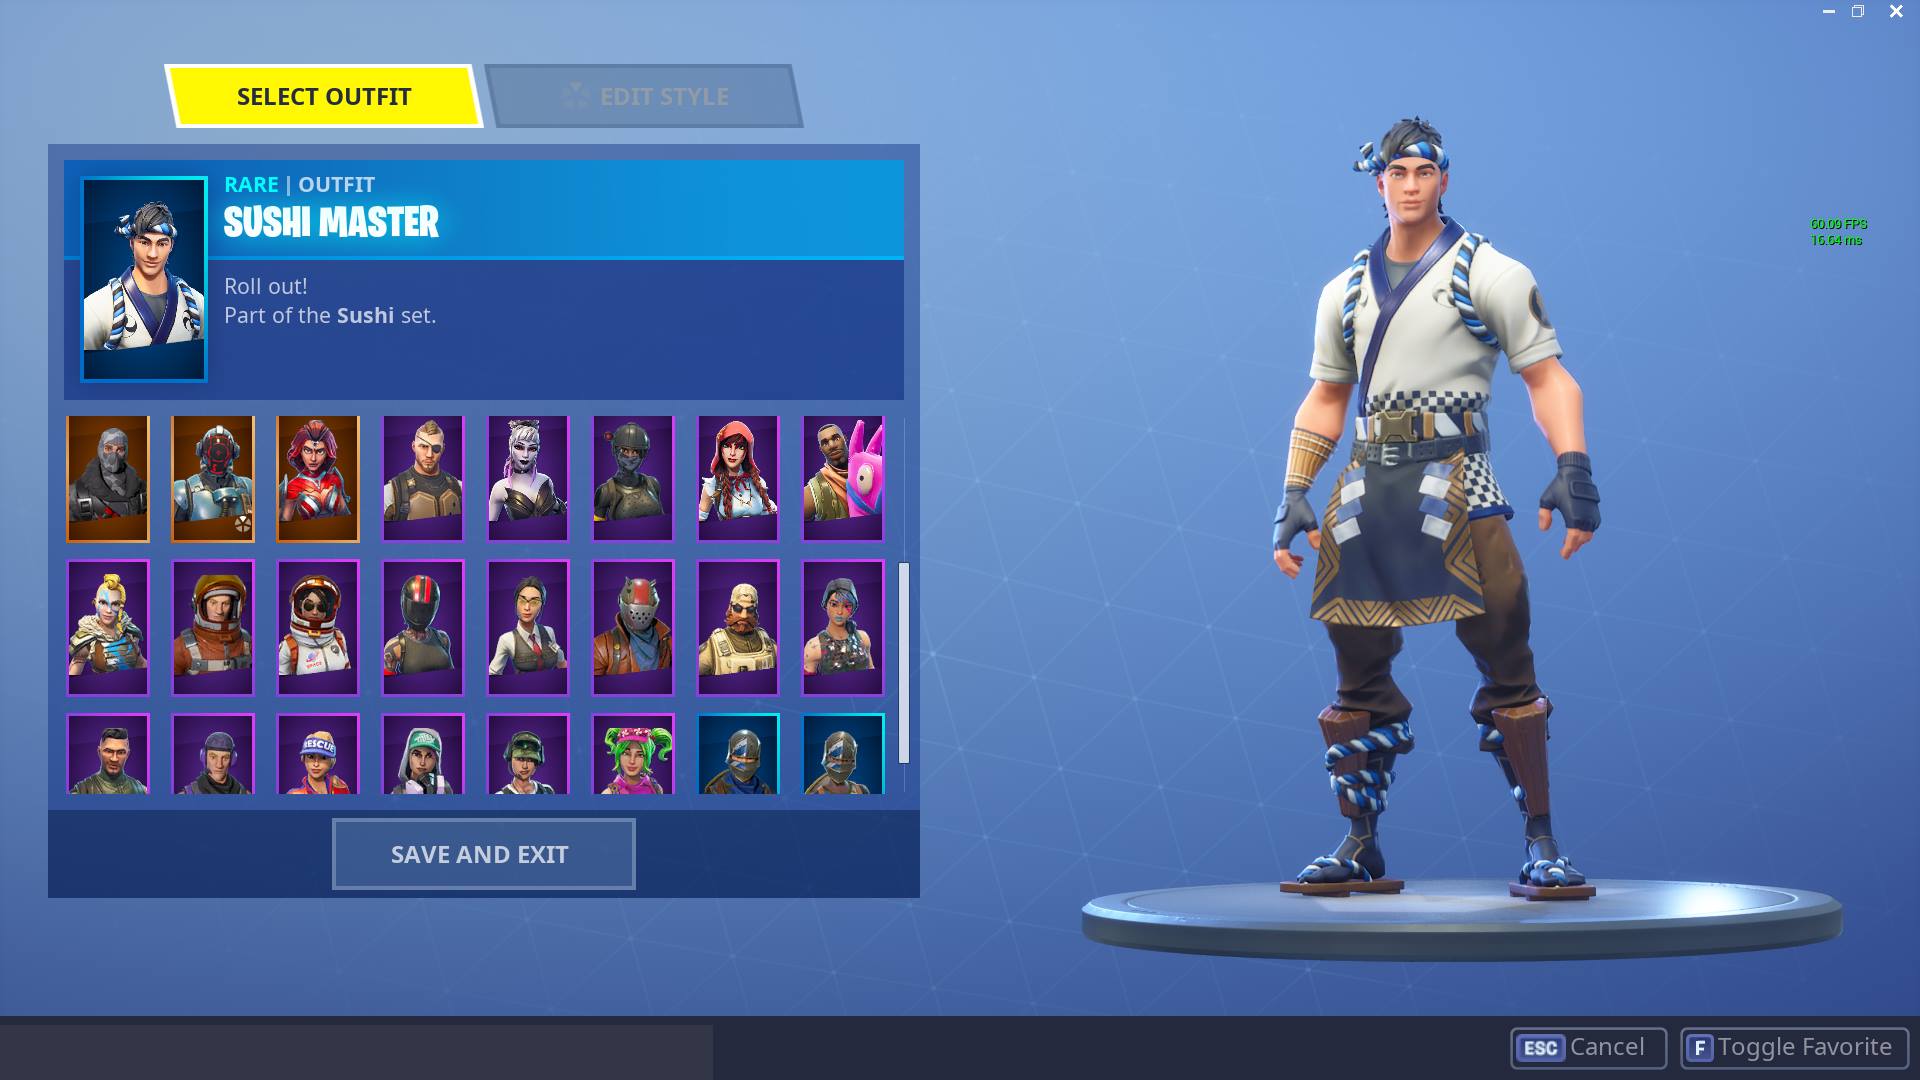 FULL EMAIL ACCESS, EMAIL CHANGEABLE, BLACK KNIGHT, GALAXY SKIN, BATTLEPASSES S2345 MAXED, STARTER PACKS, SUSHI SKINS AND MORE No.25